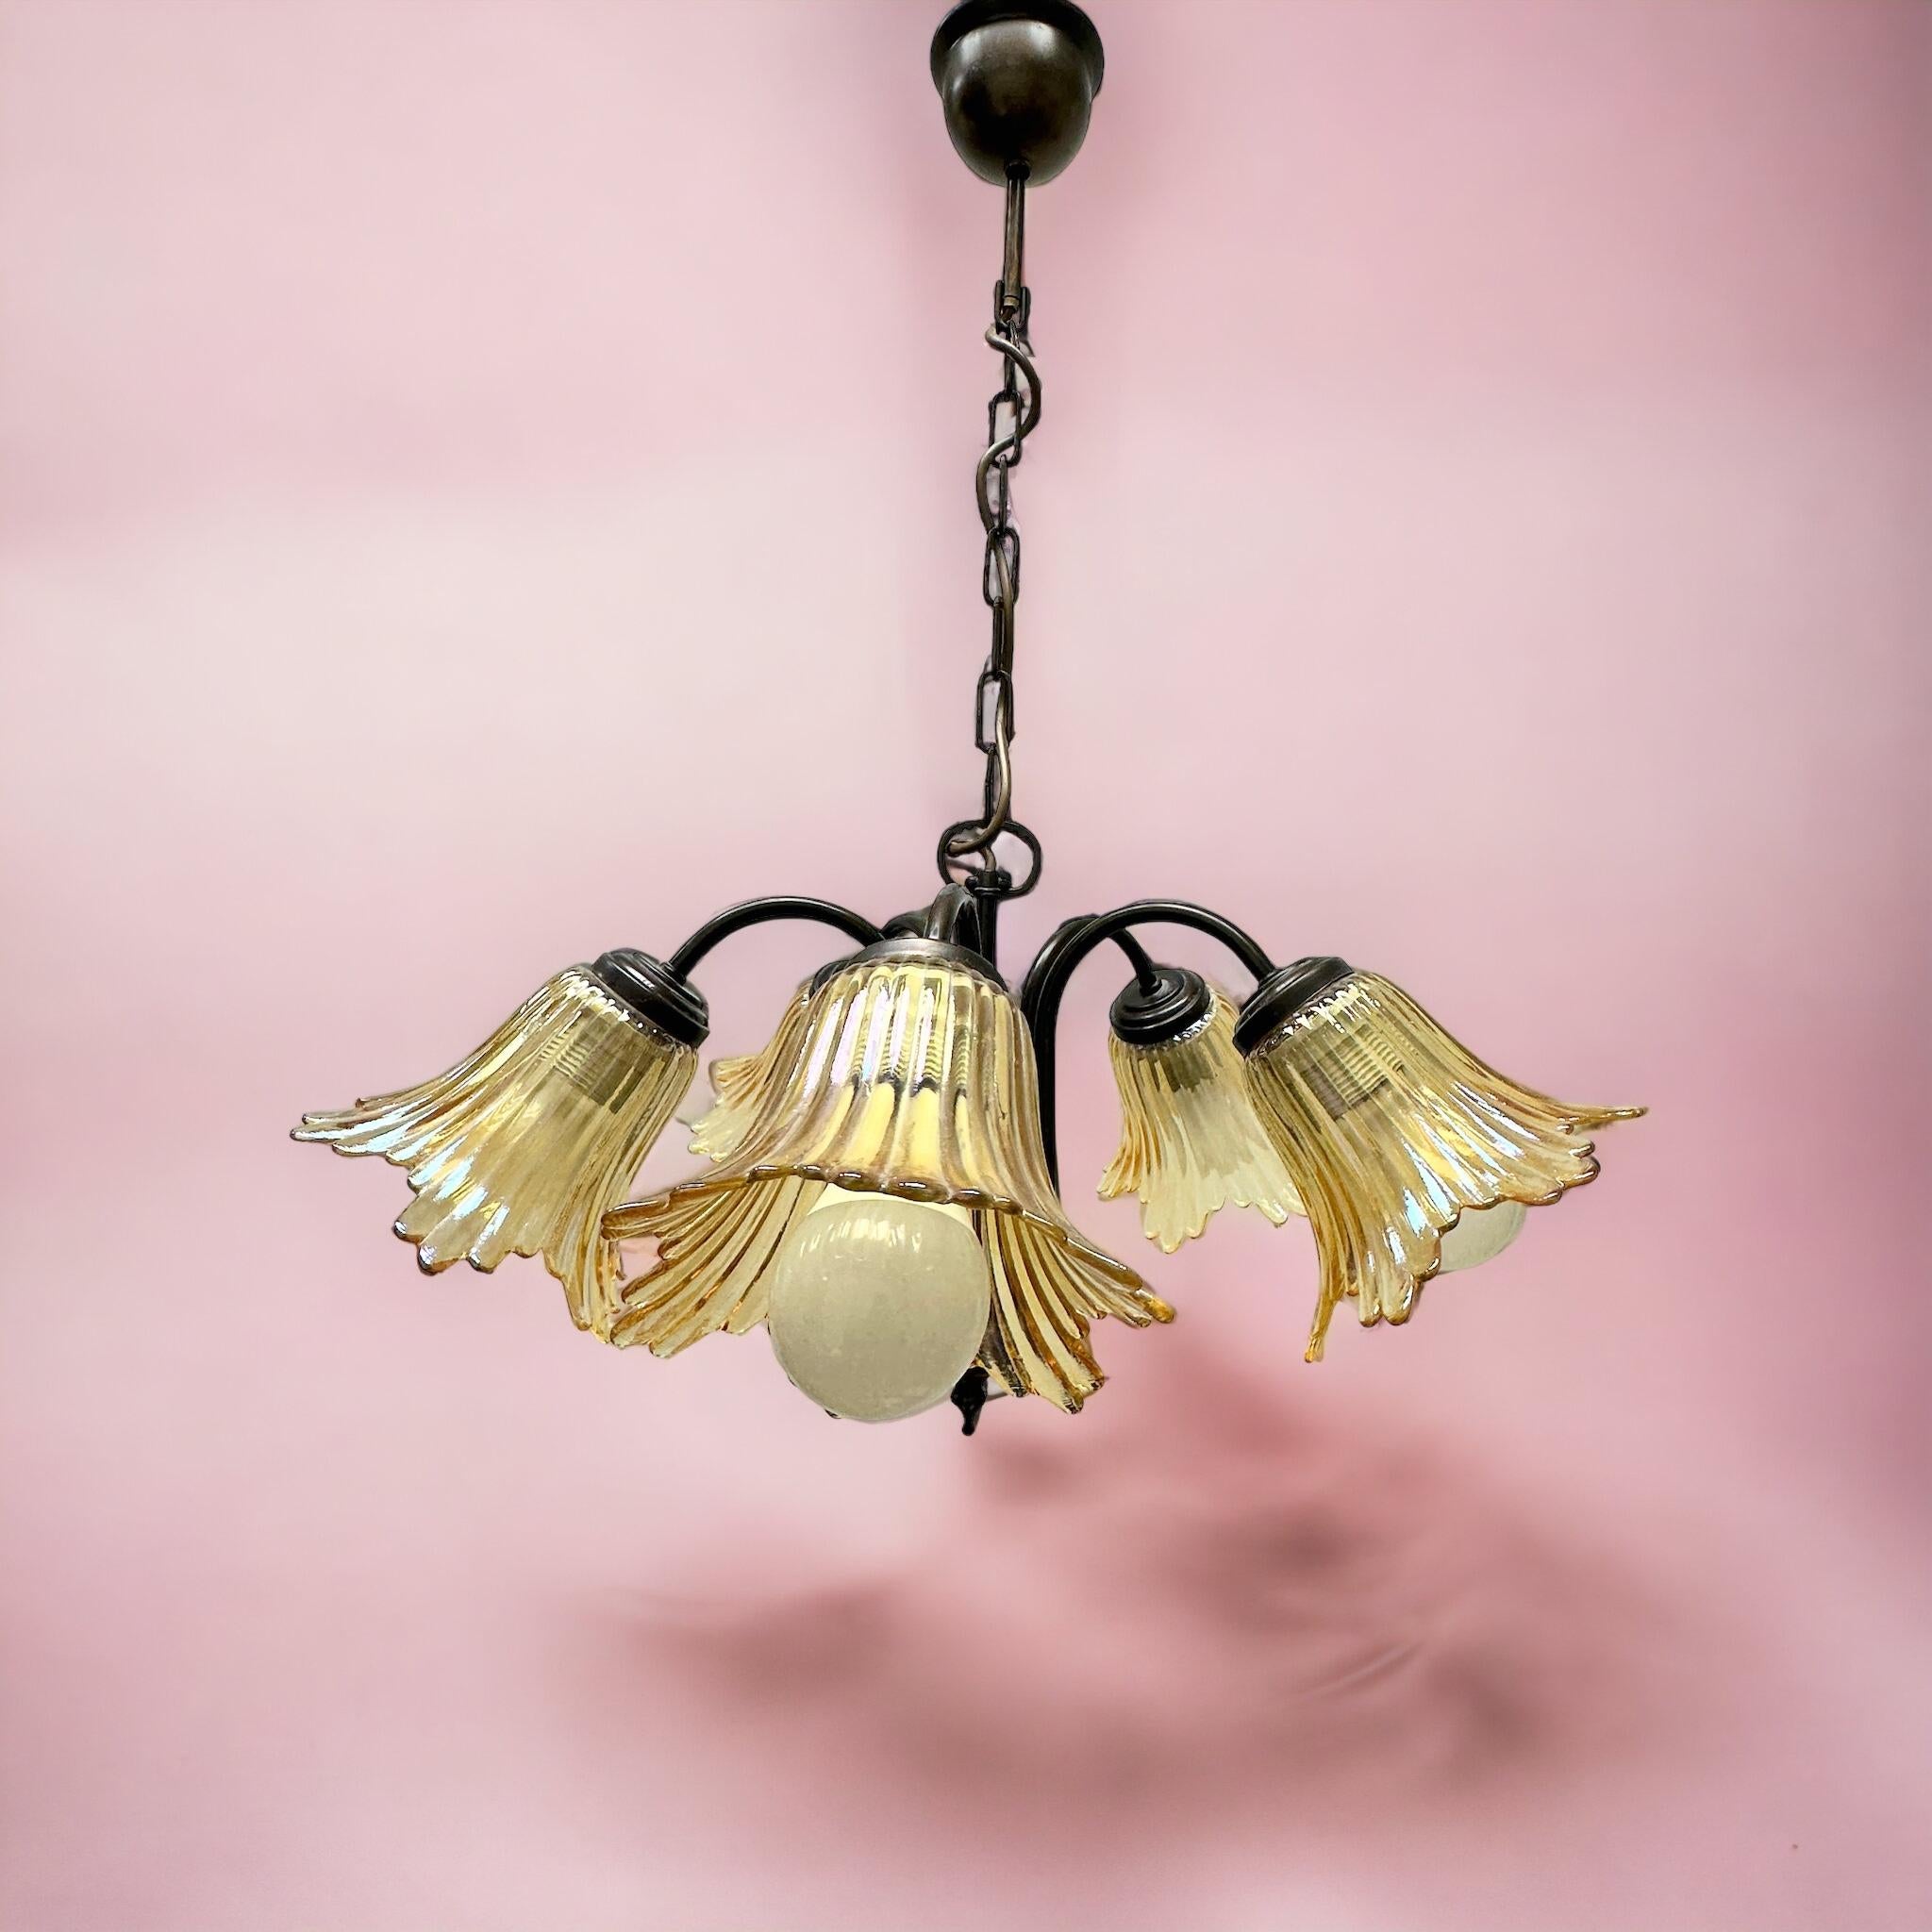 Petite Florentine style five-light chandelier. Functions as is with five E27 / 110 Volt light bulbs. Can take up to 60 Watts each bulb. Beautiful metal chandelier with flower glass shades. It gives a very warm light and represents the Italian